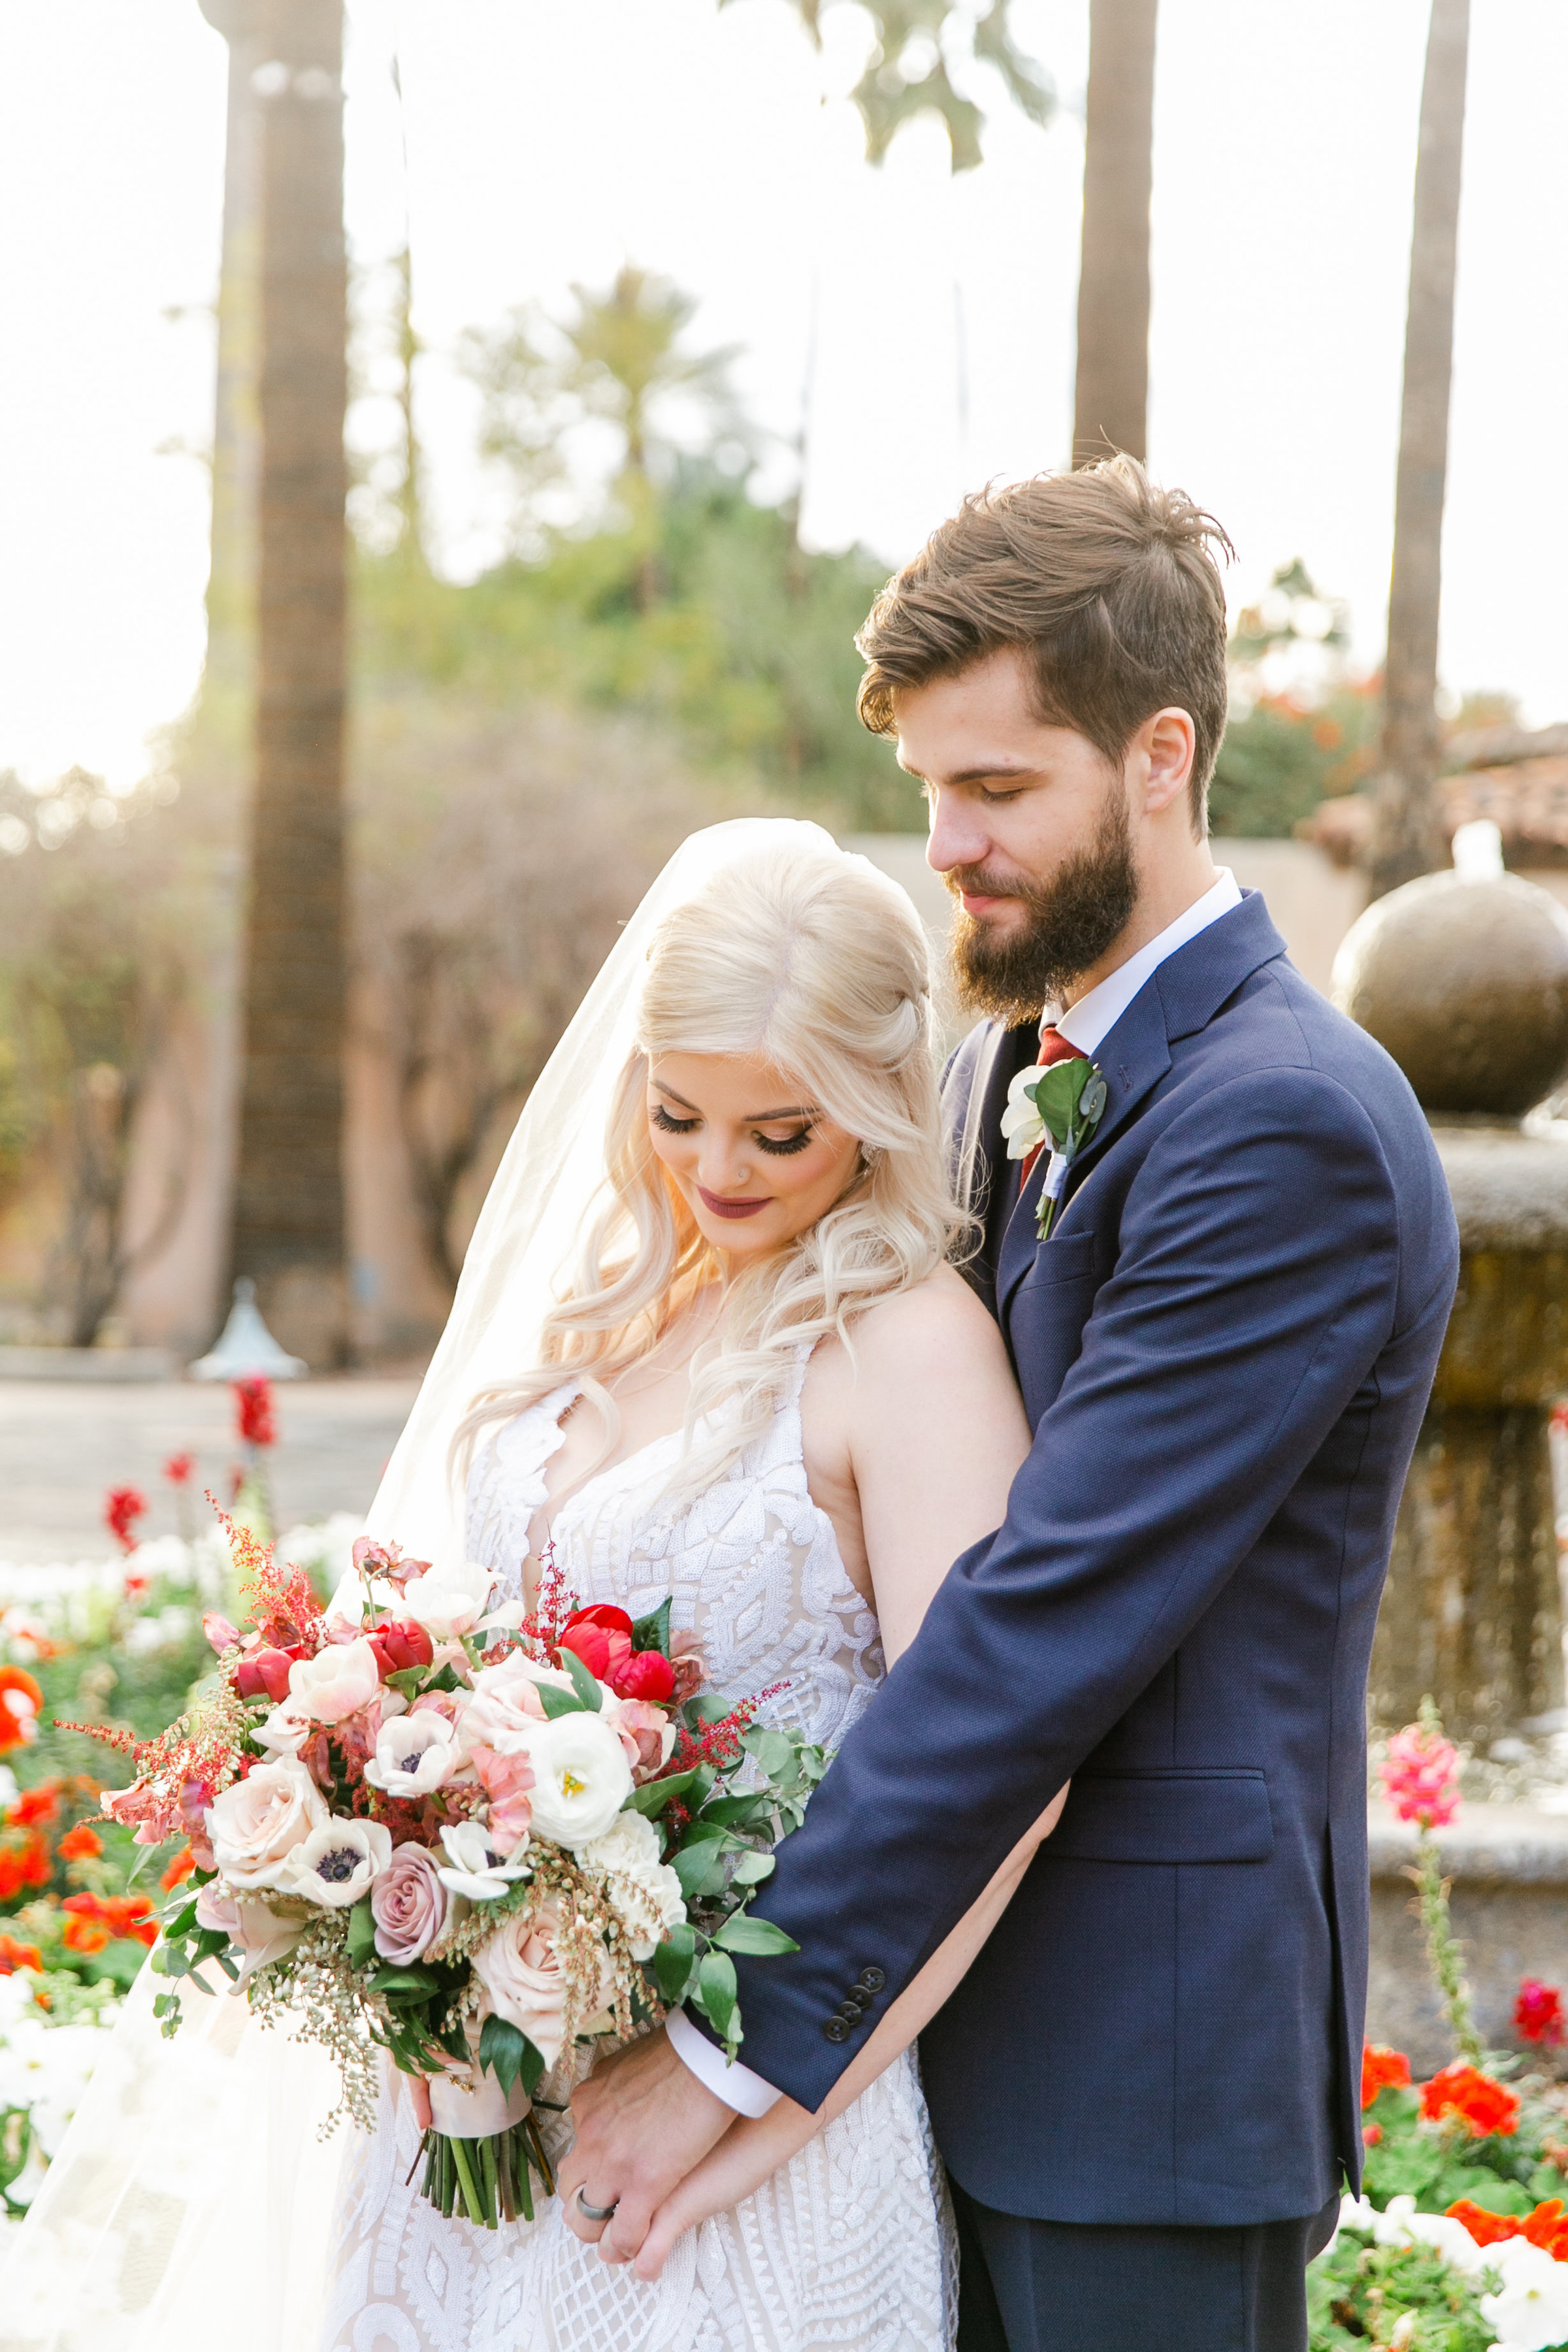 Karlie Colleen Photography - The Royal Palms Wedding - Some Like It Classic - Alex & Sam-542